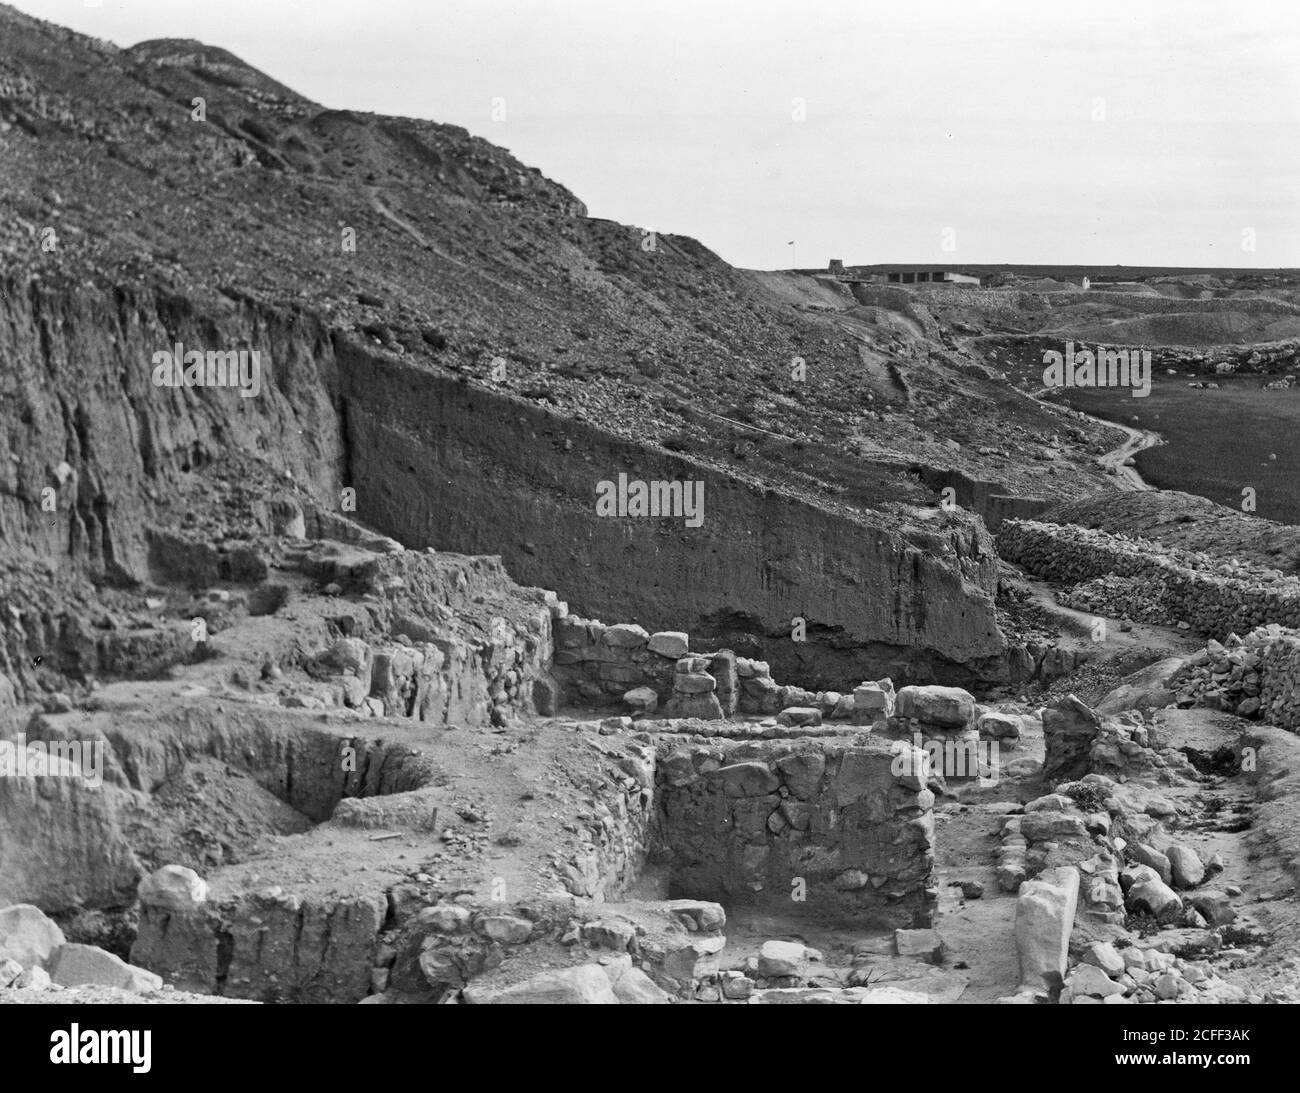 Middle East History - Tel Deweir (Lachish). XVIIIth-XIXth dynasty temple. Ante chamber to sanctuary visible right. White line denotes rubbish frombuilding of I[ron] age Stock Photo